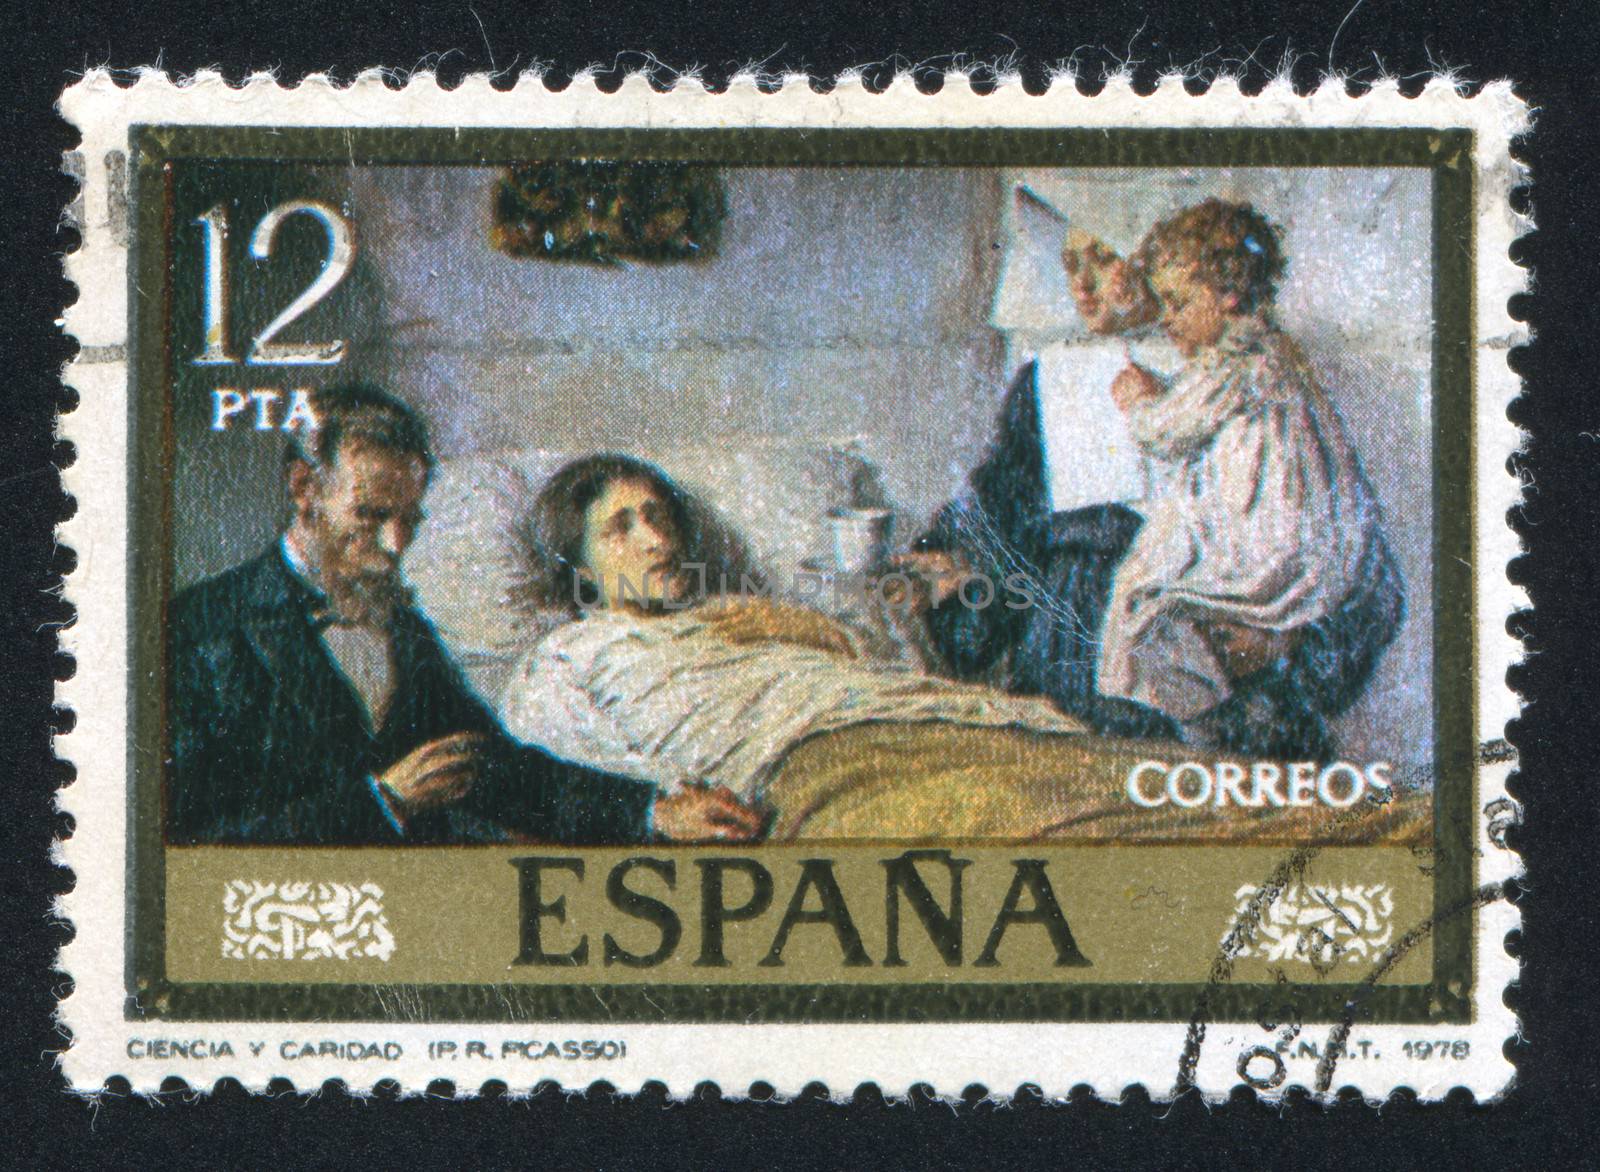 SPAIN - CIRCA 1978: stamp printed by Spain, shows Science and Charity (Pablo Ruiz Picasso), circa 1978